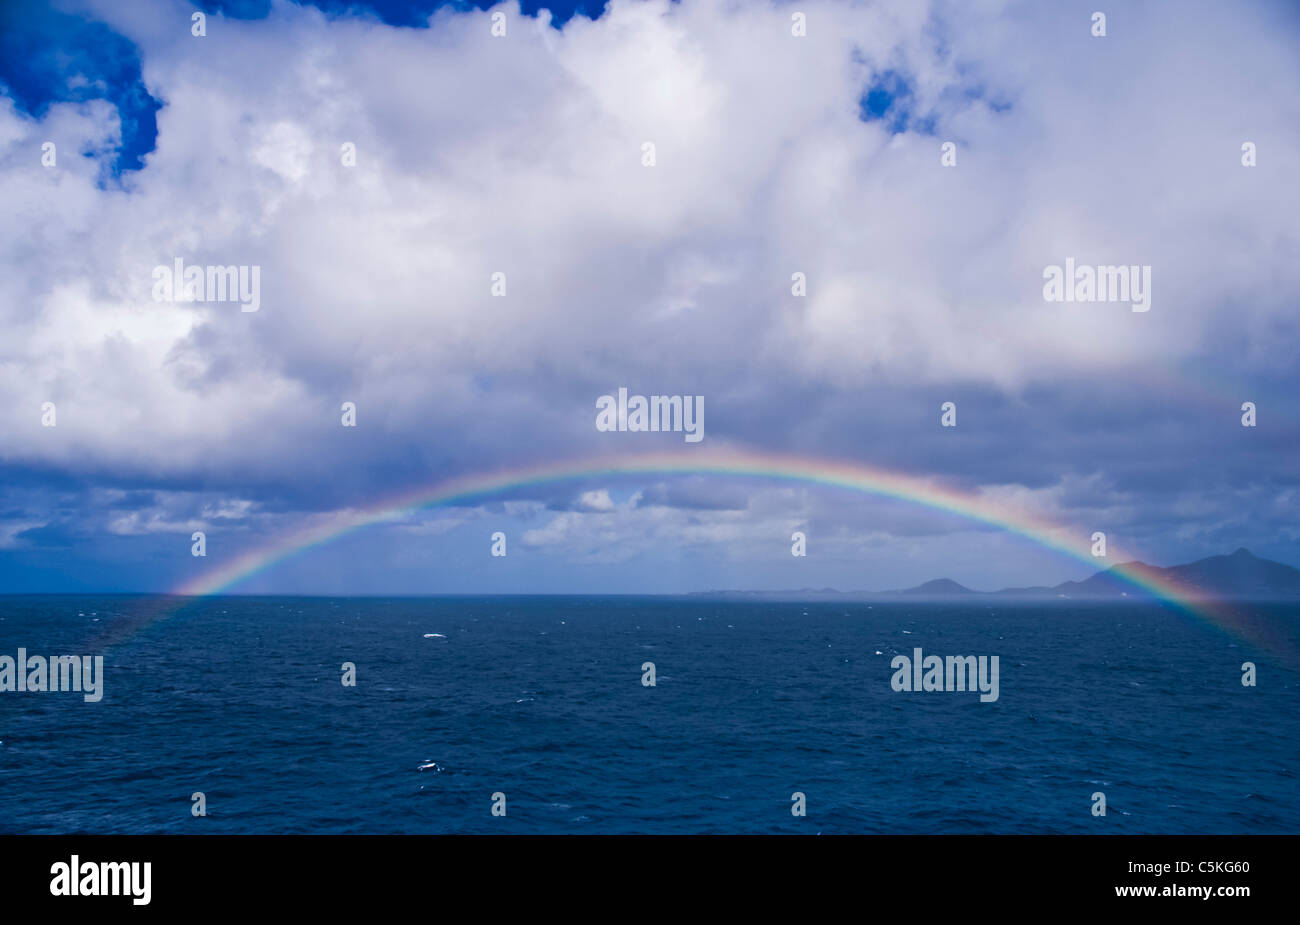 A nice rainbow seen coming into port of call at Saint Maarten Island. French and Dutch share this island. Stock Photo